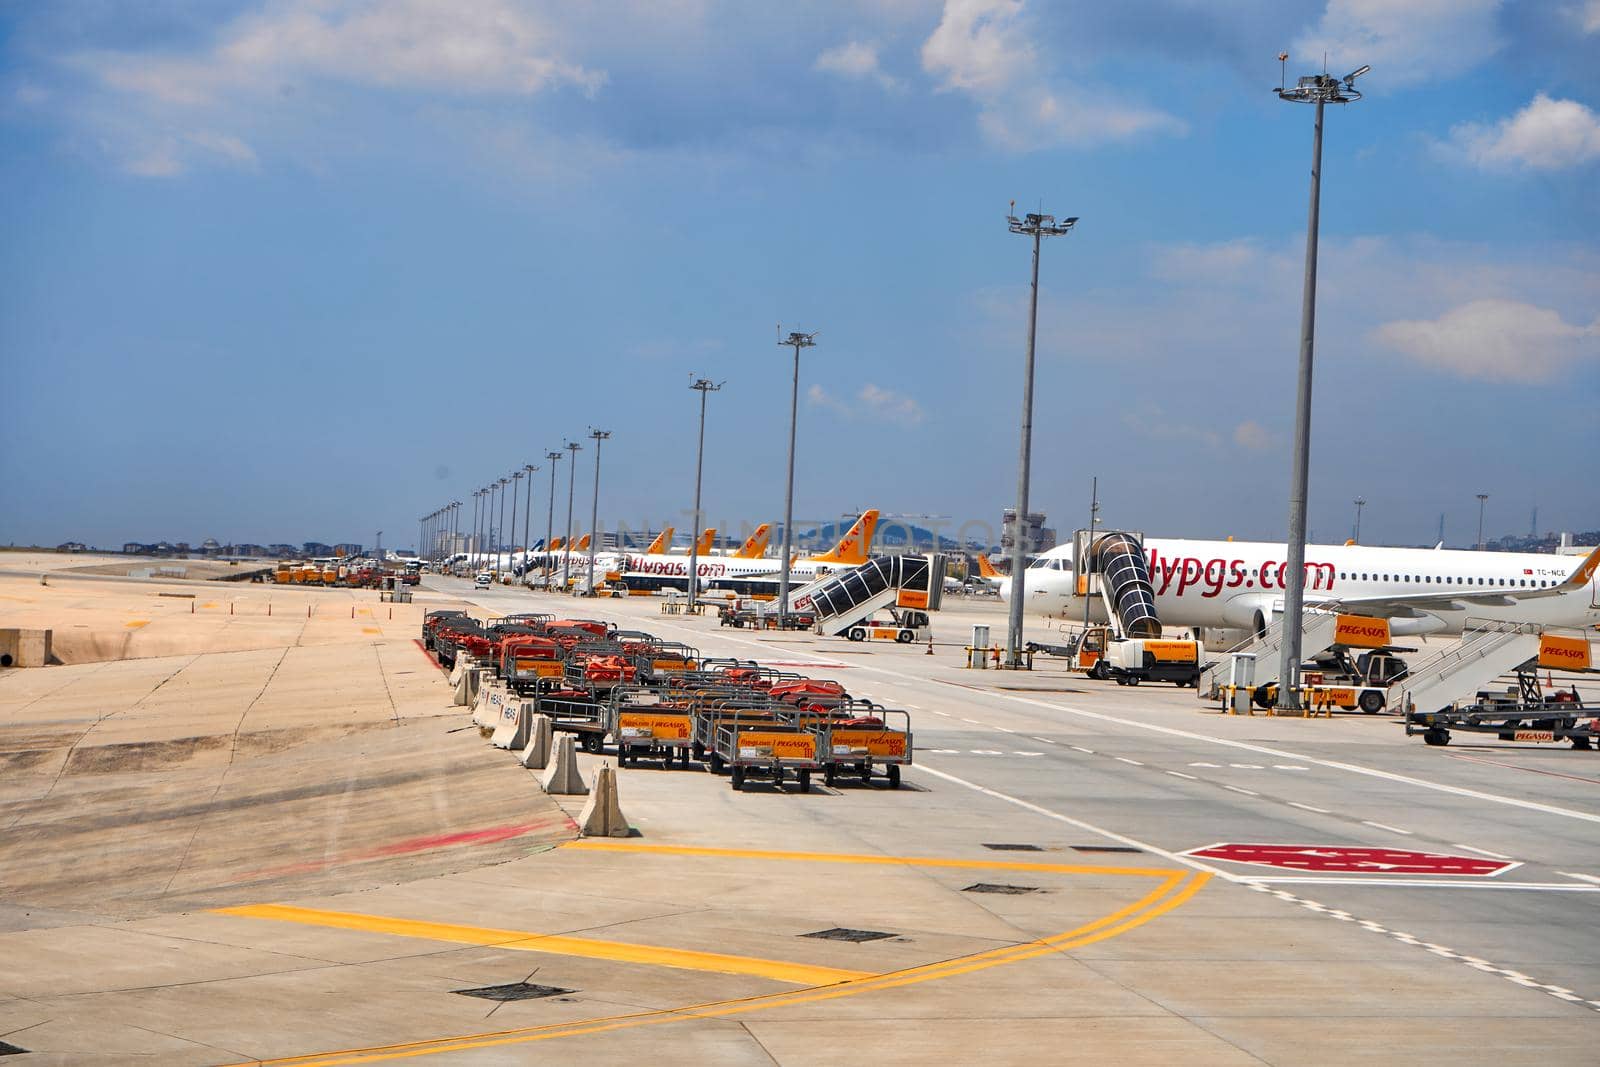 Carts for transportation and loading of passengers' belongings on the plane in the parking lot near the plane. Airport special transport. Turkey , Istanbul - 21.07.2020